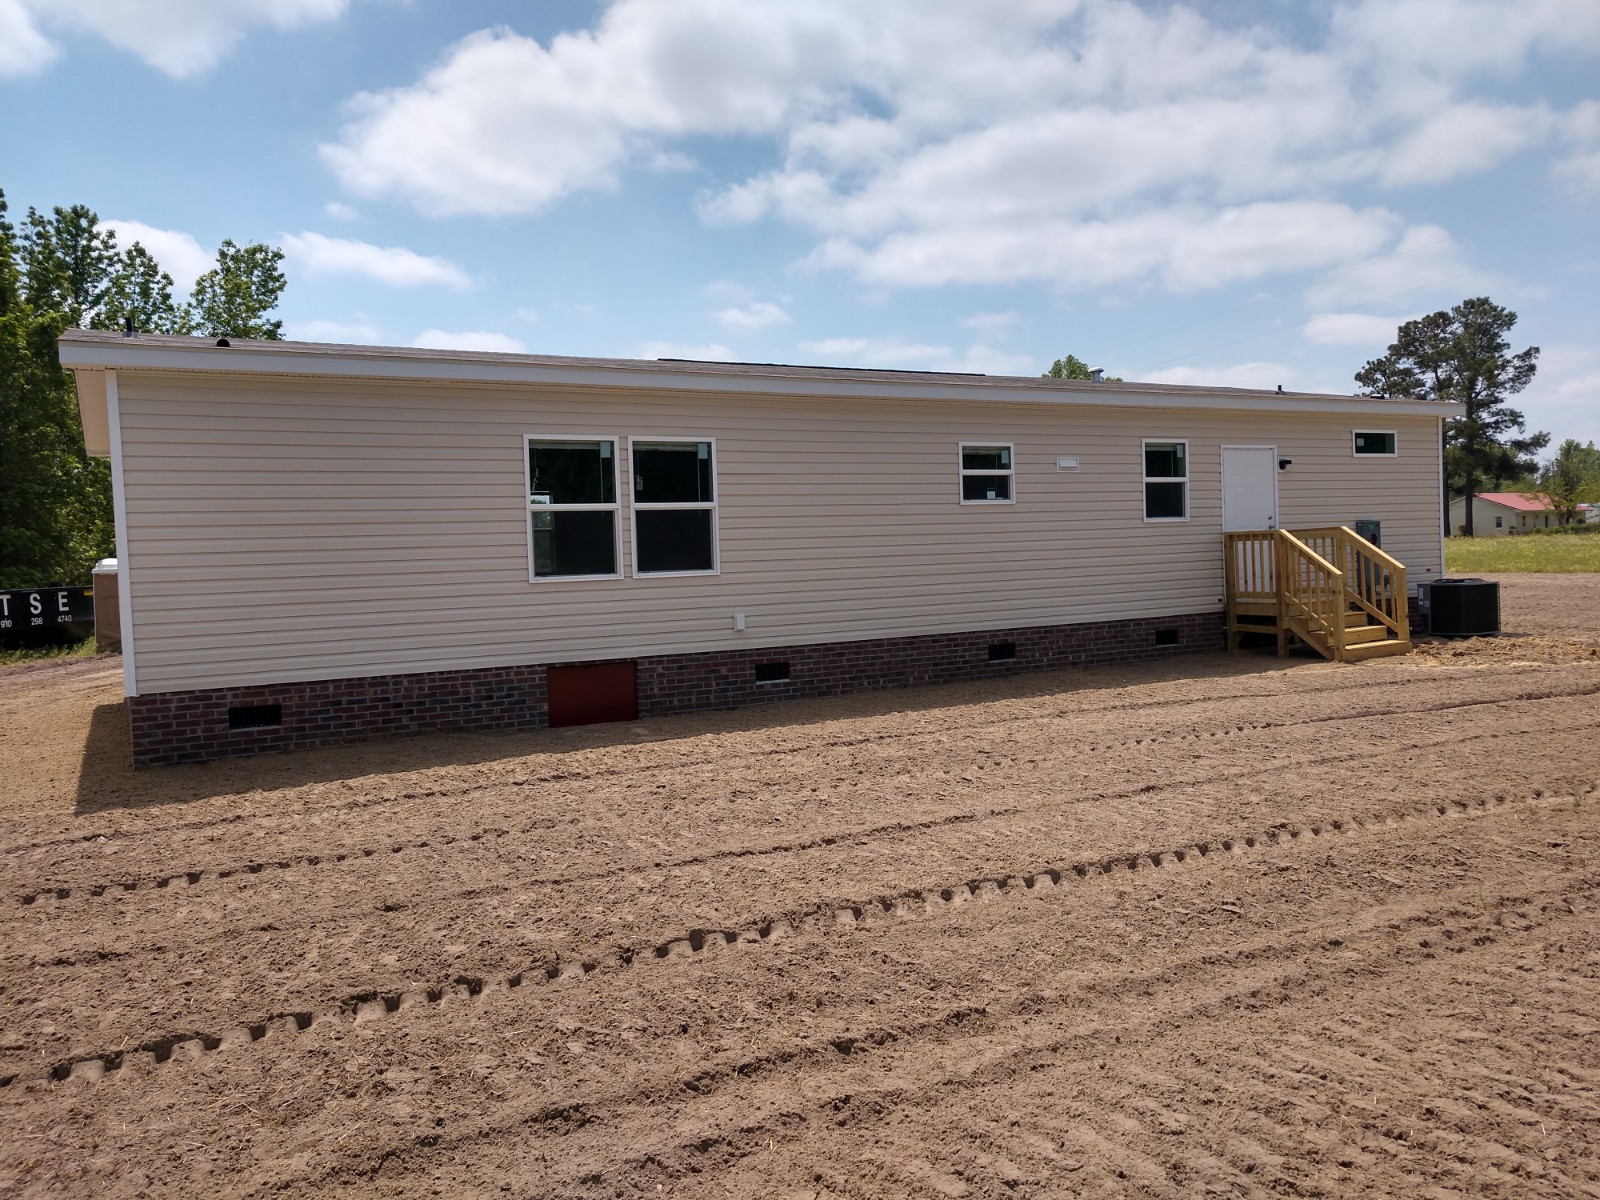 Consider a Luxury Manufactured Home